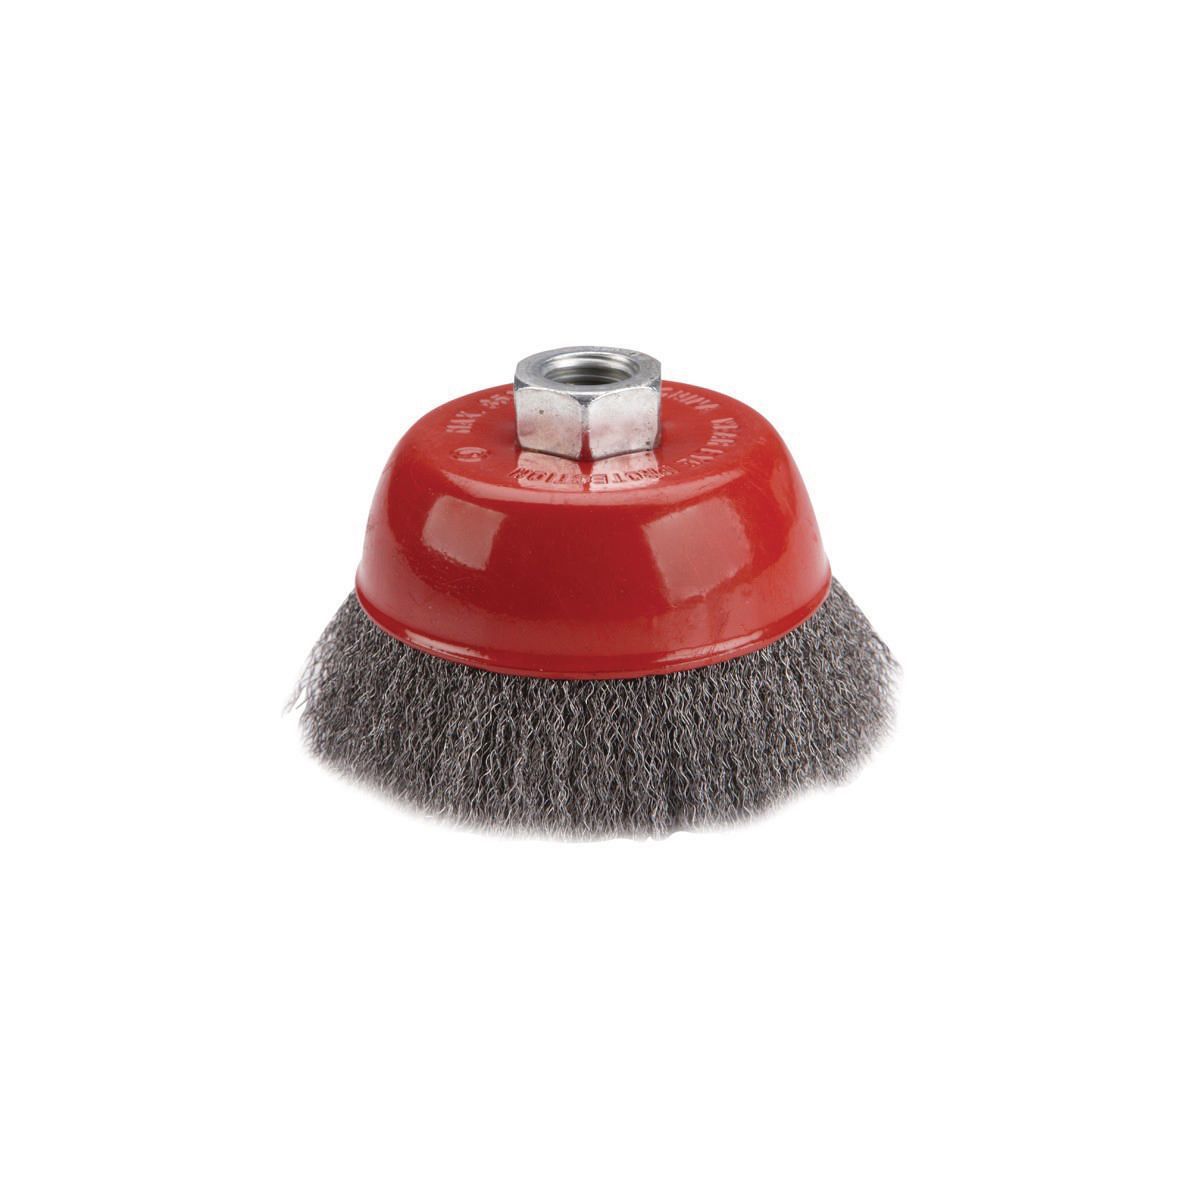 WARRIOR 4 in. Crimped Wire Cup Brush